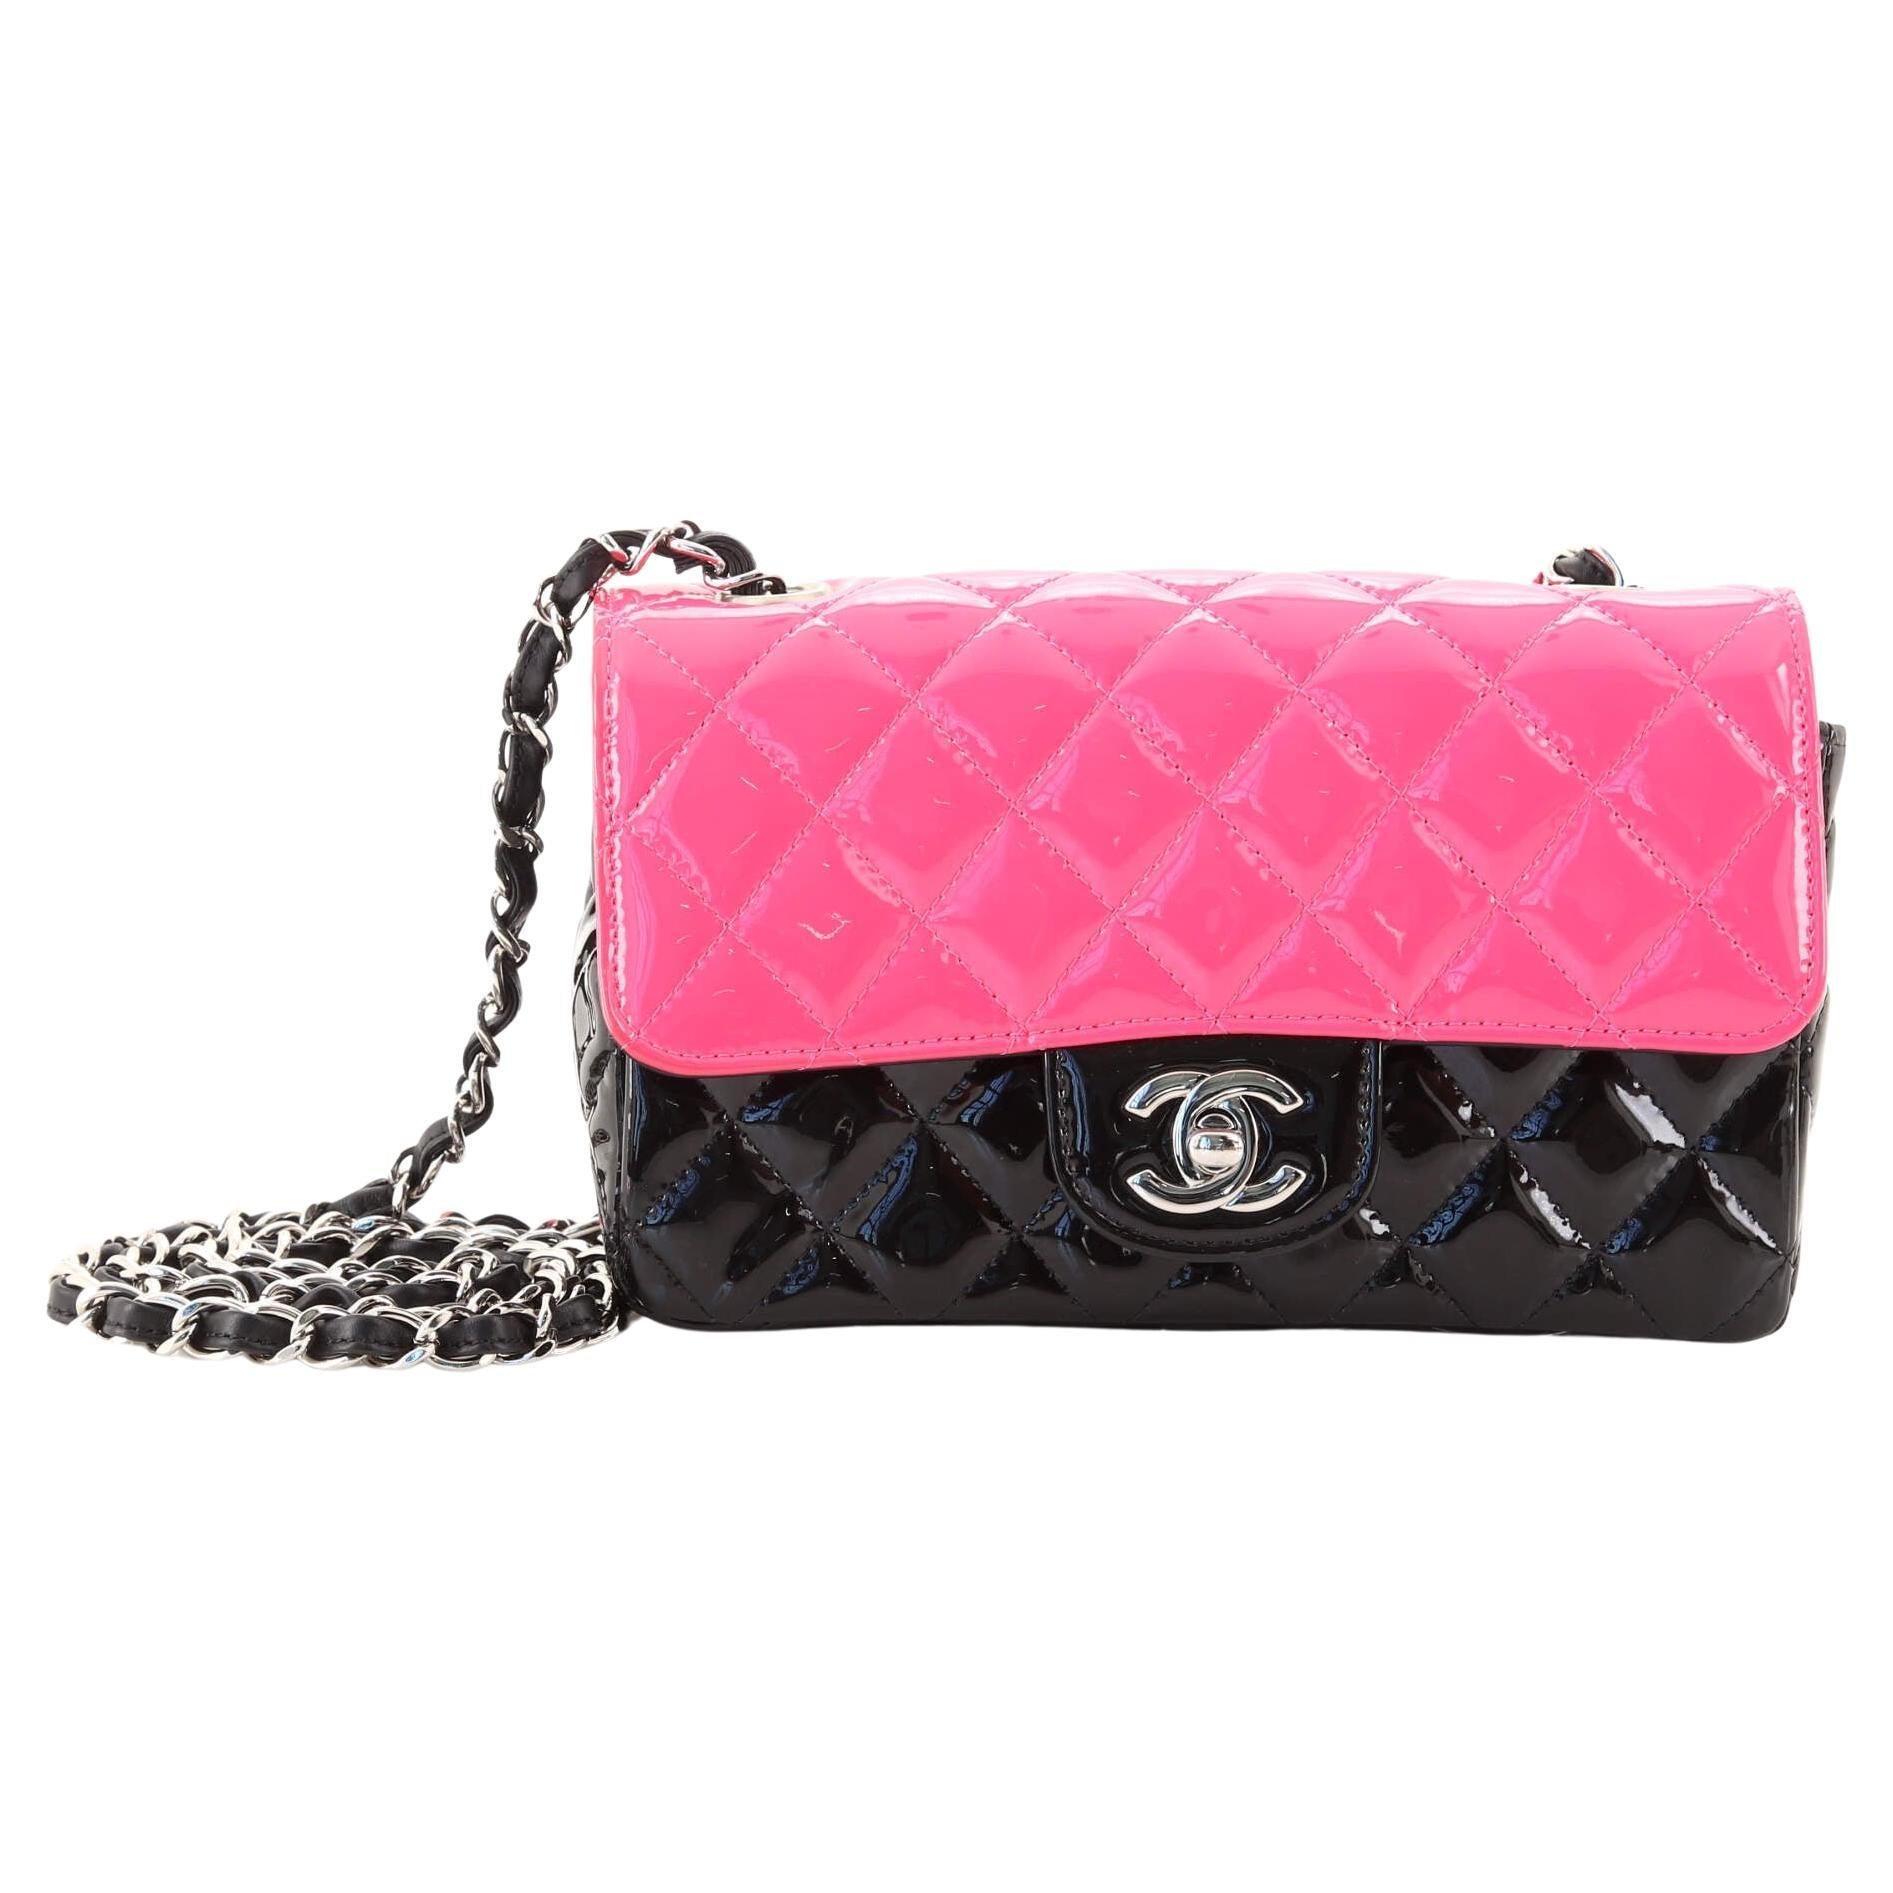 Chanel Mini Timeless Shoulder bag in Pink quilted leather and gold ...